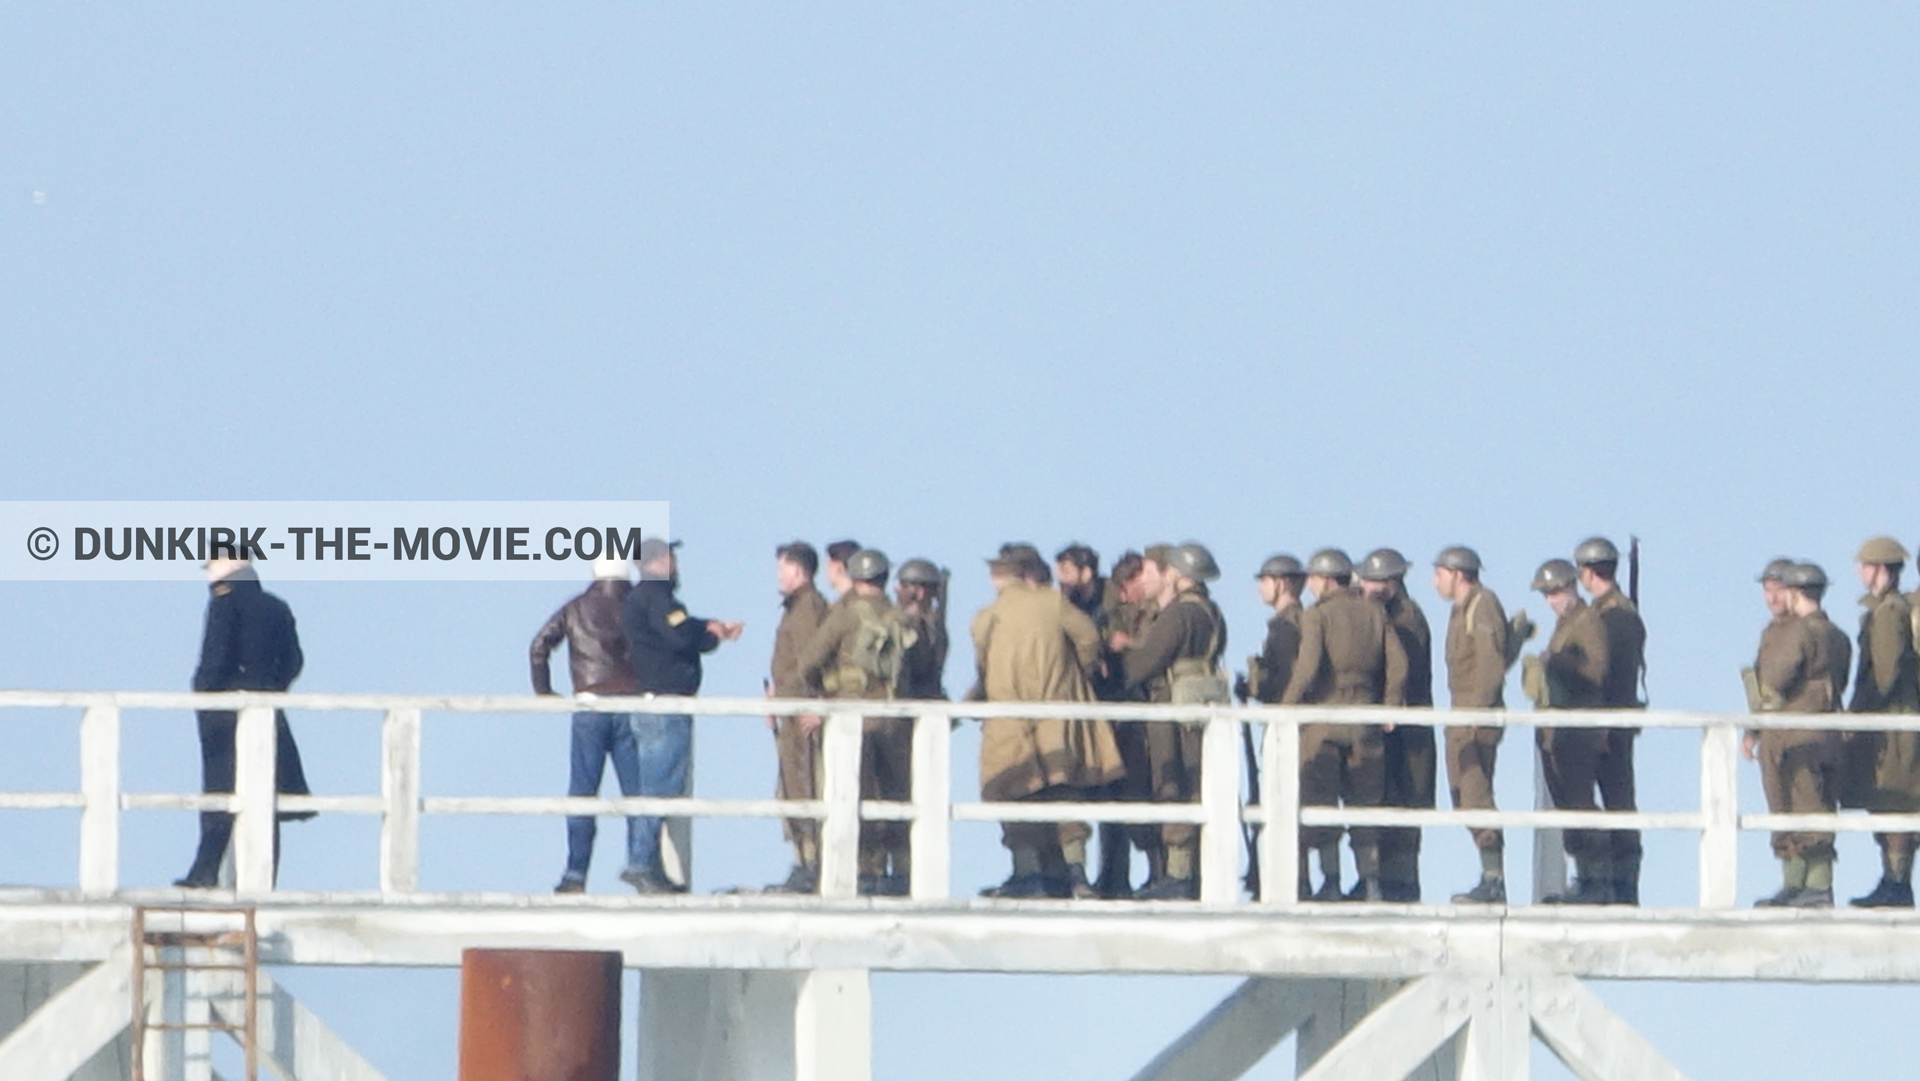 Picture with supernumeraries, EST pier, Kenneth Branagh, technical team,  from behind the scene of the Dunkirk movie by Nolan